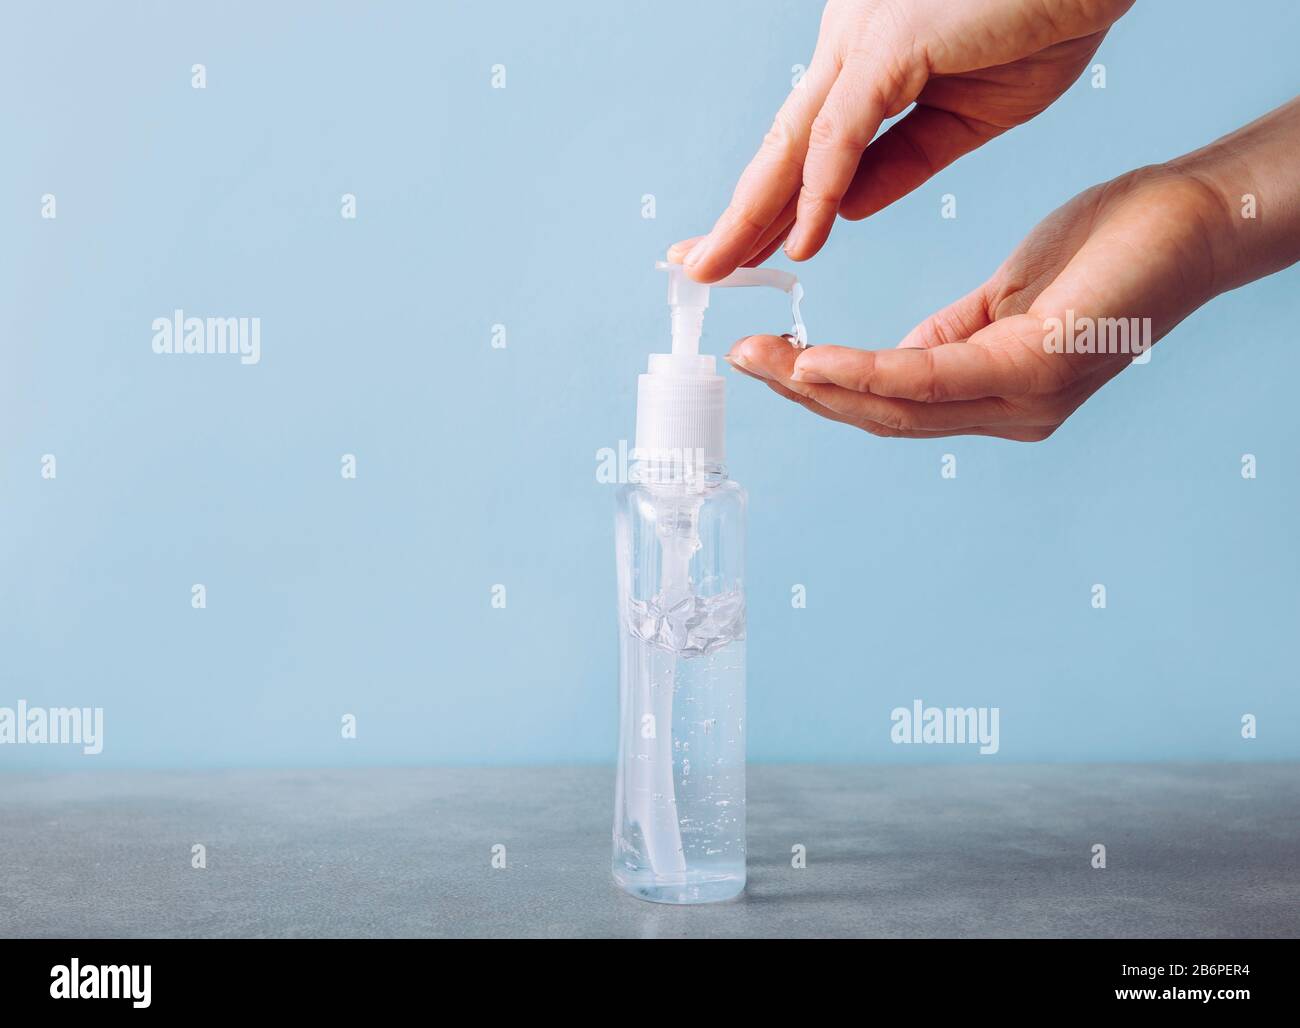 Close up view of woman using hand sanitizer dispenser, blue clean minimalist background. Health concerns concept. Stock Photo